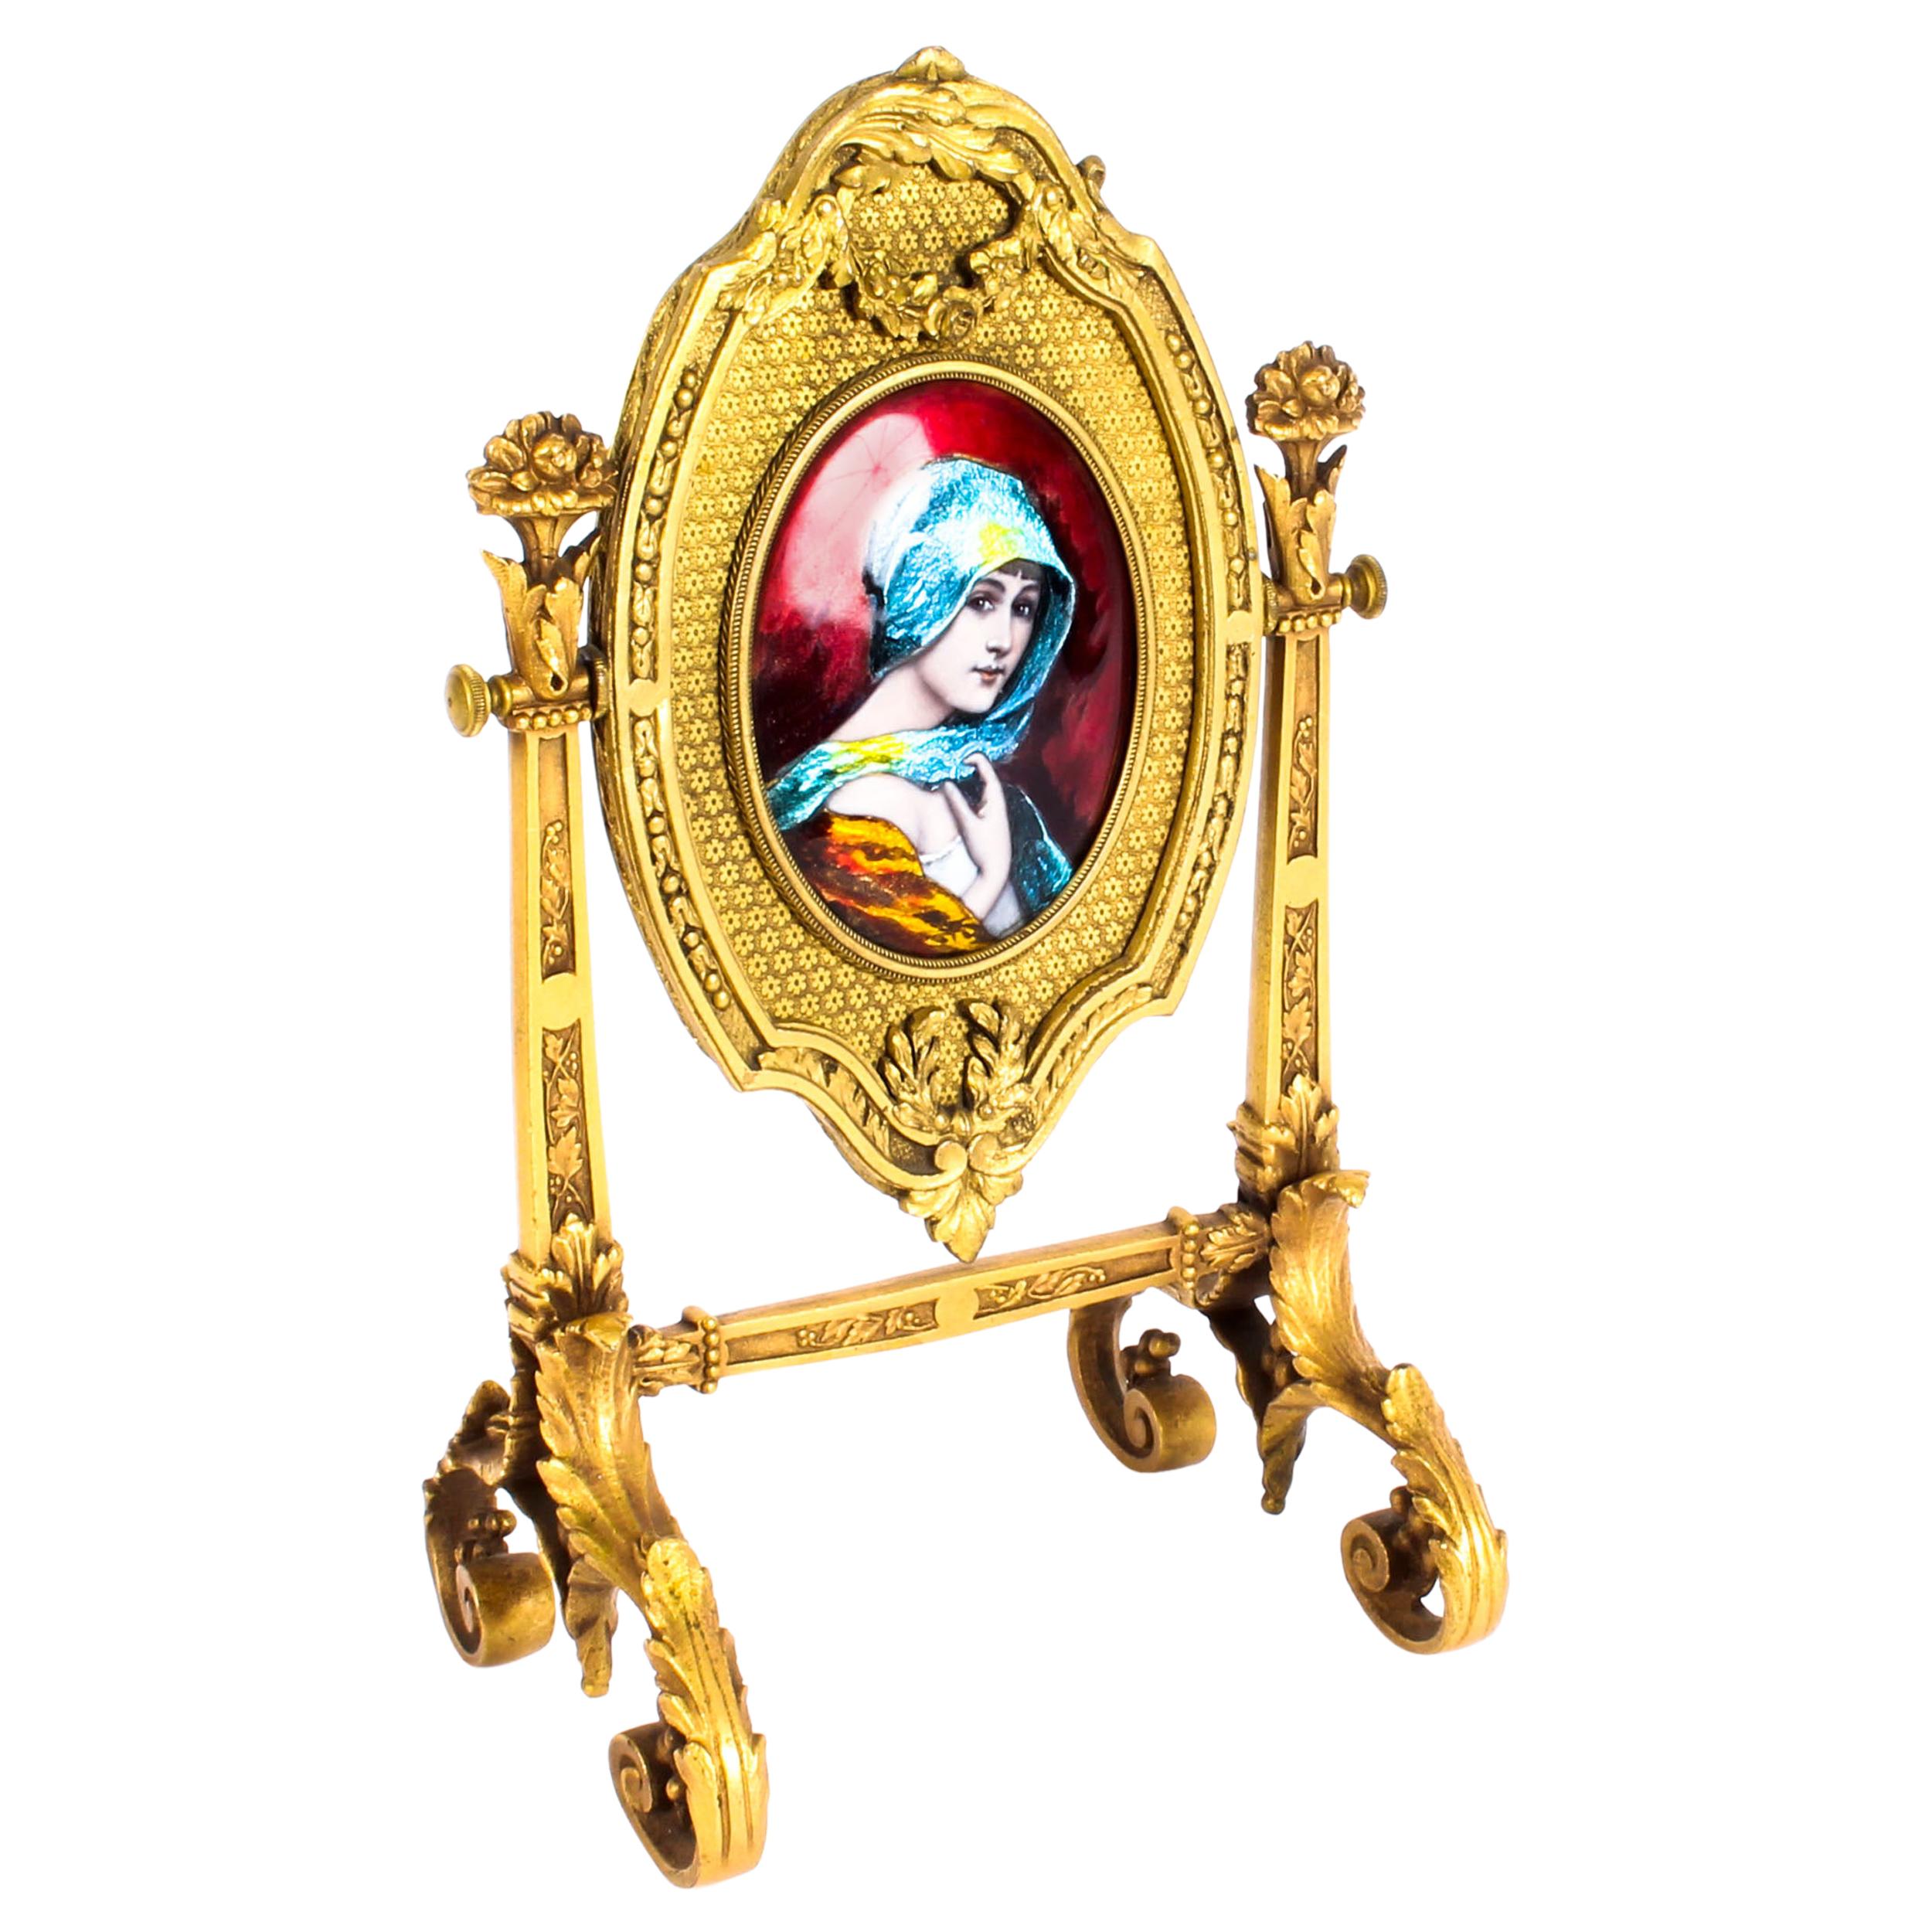 Antique French Ormolu and Limoges Enamel Table Mirror F.Bienvue, 19th Century